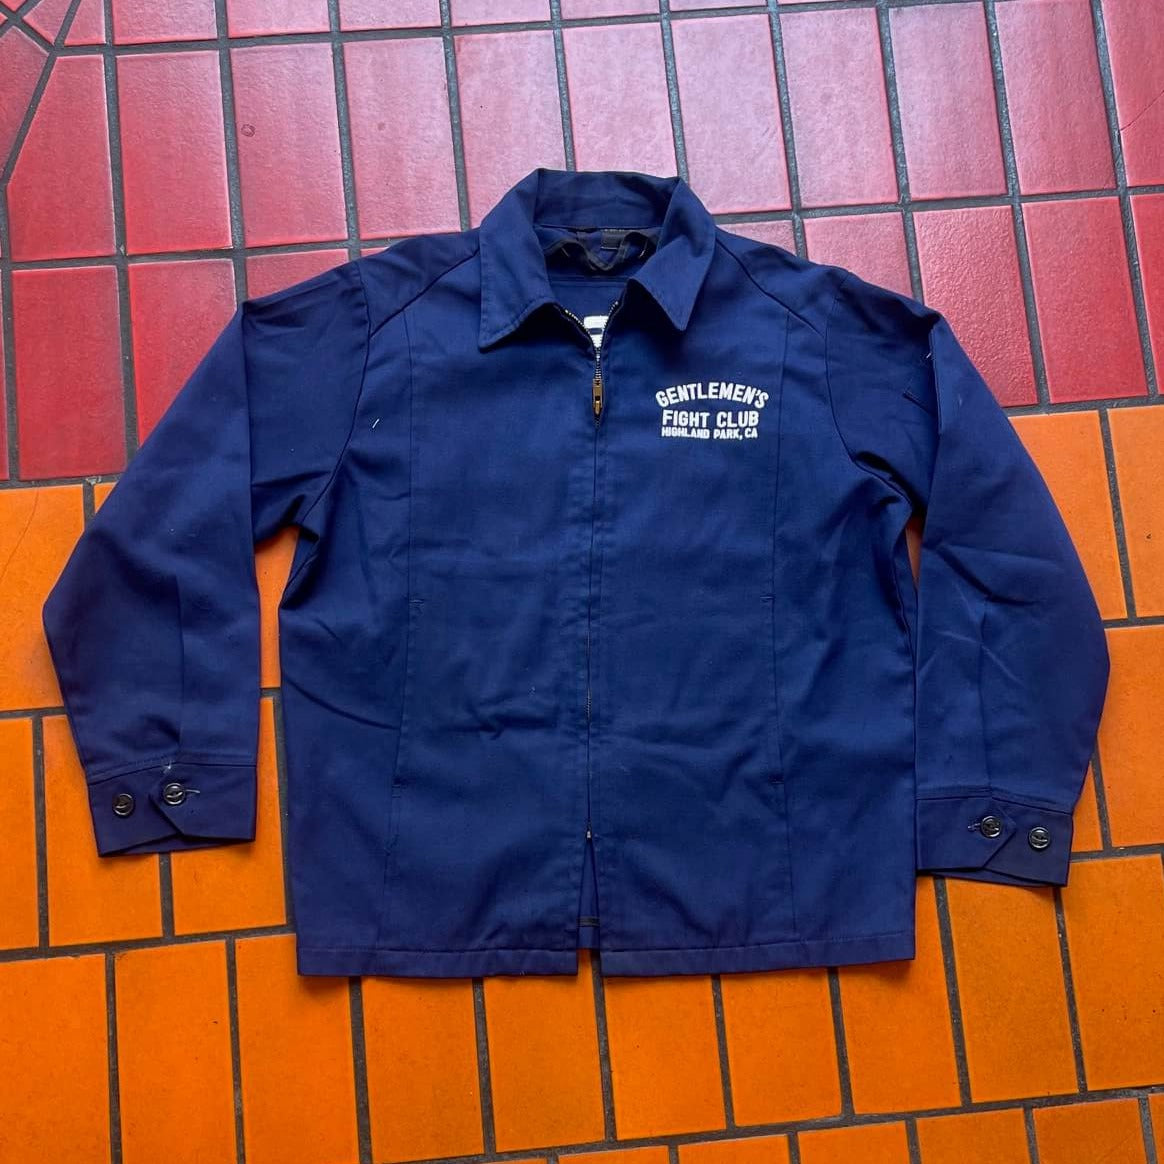 Limited Deadstock Work Embroidered Jacket